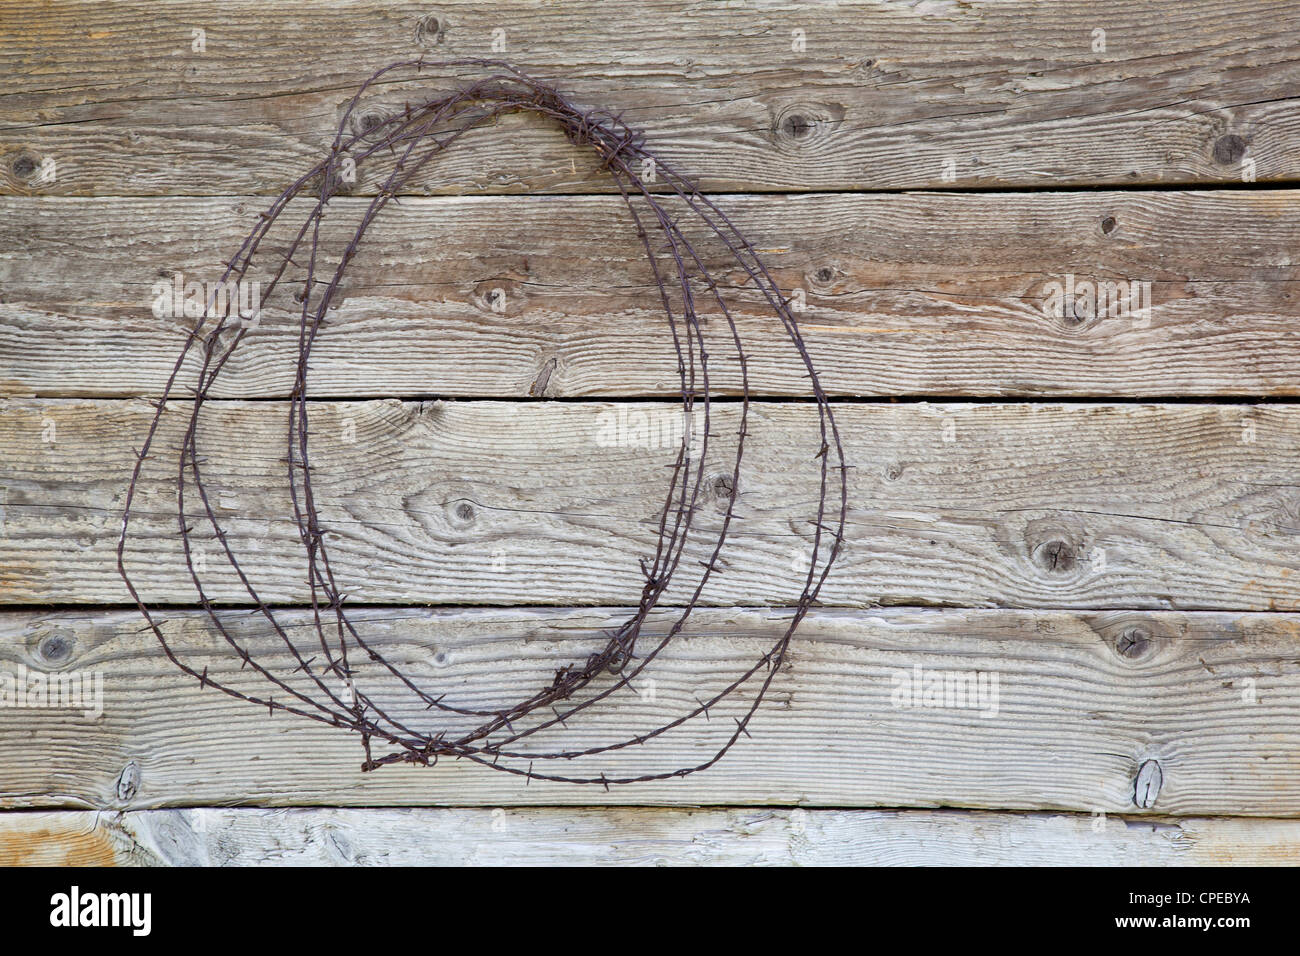 rusty barbed wire coil hanging on a weathered wood barn wall Stock Photo